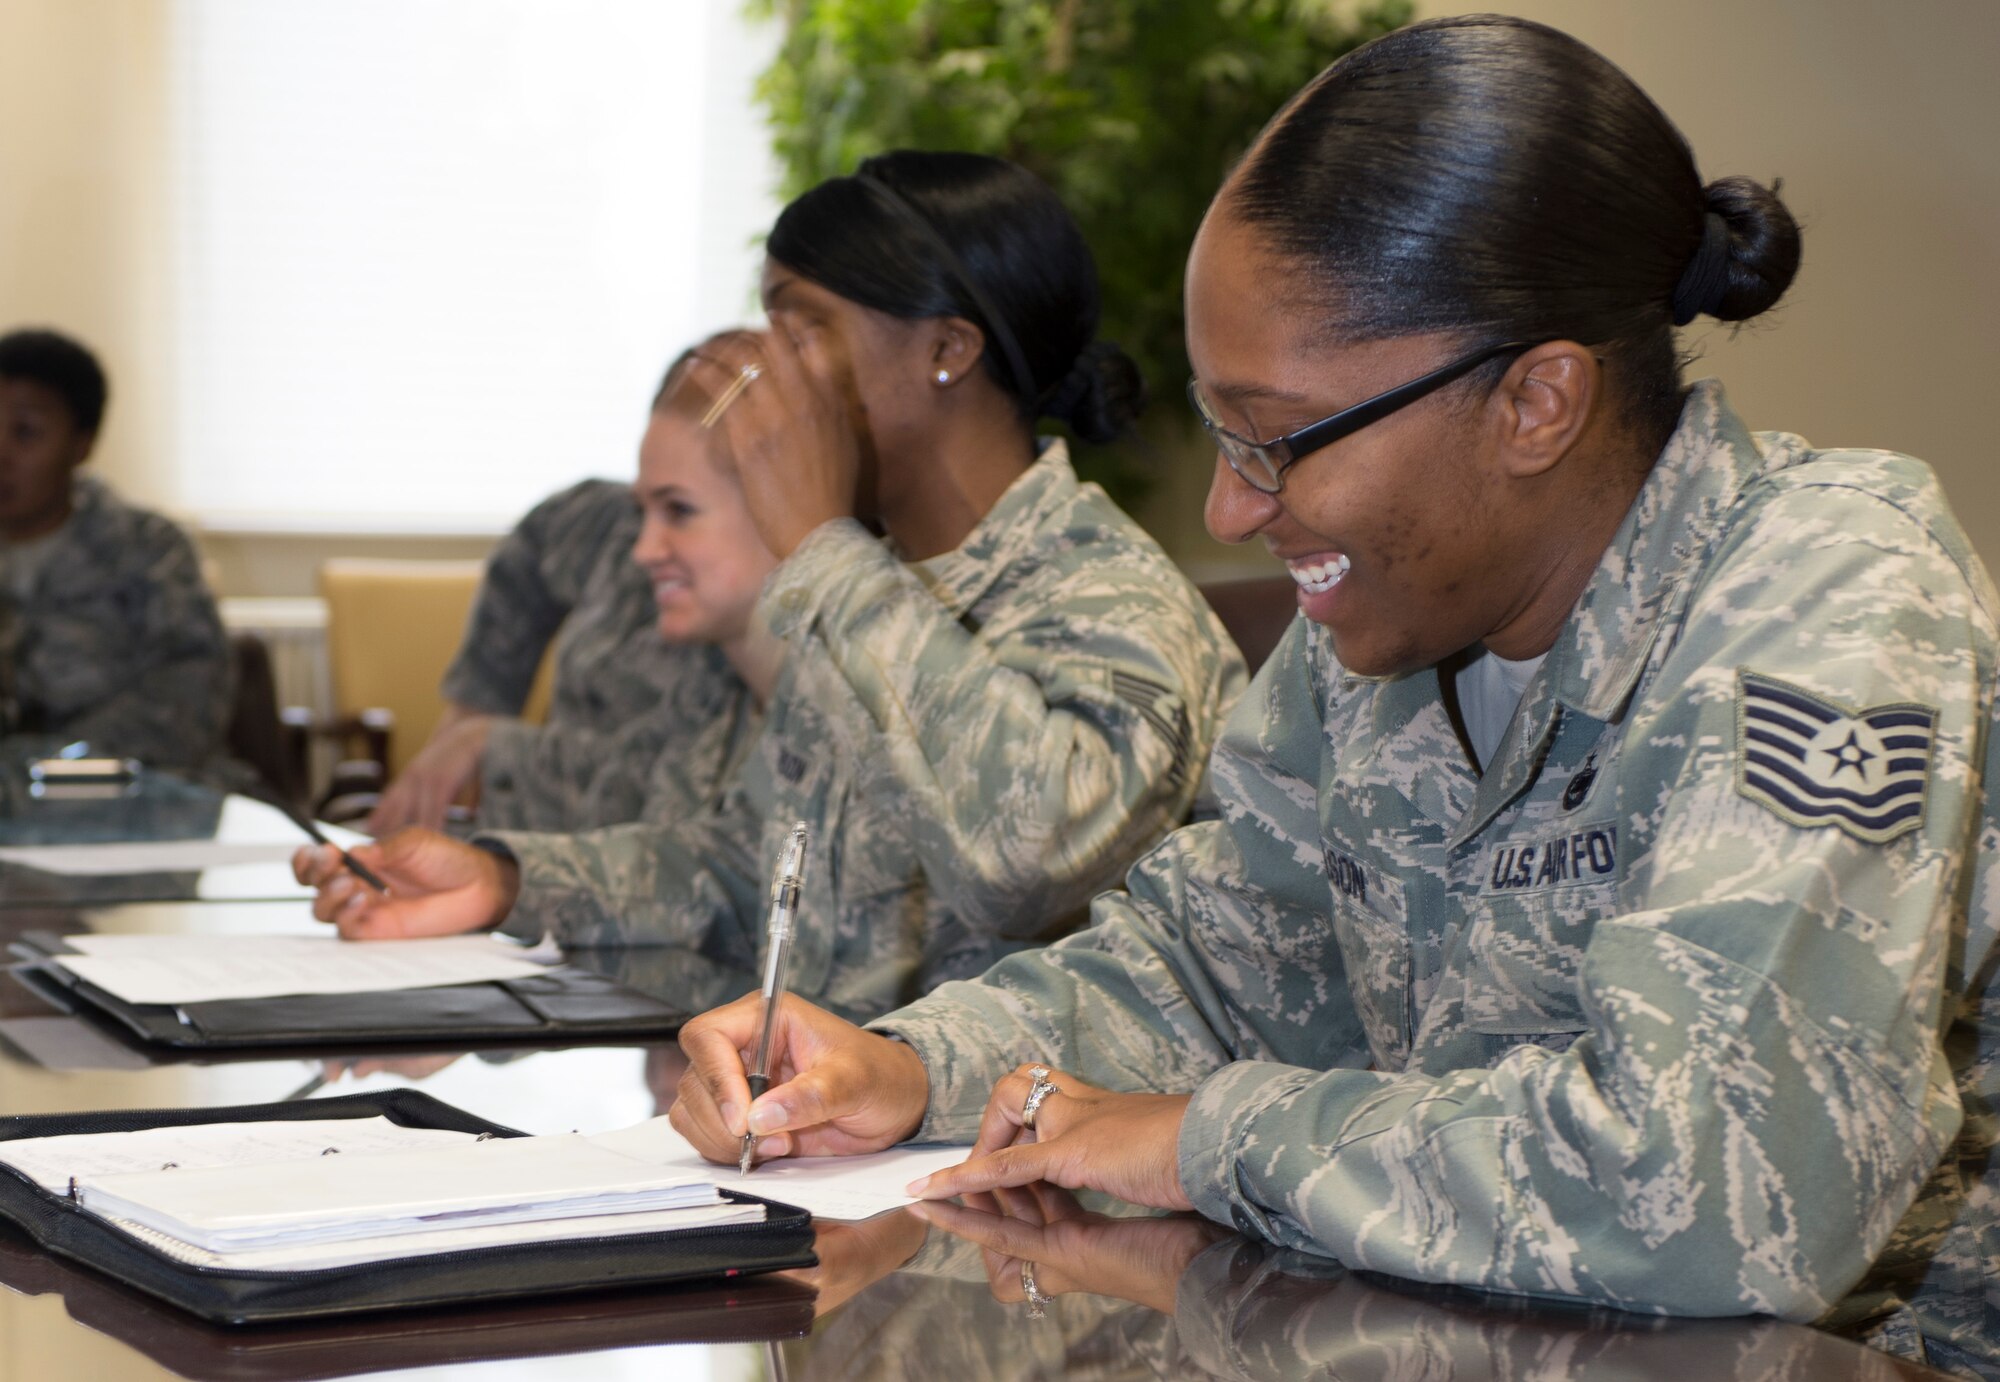 SPANGDAHLEM AIR BASE, Germany -- Tech. Sgt. Victoria Wilson, Pitsenbarger Airman Leadership School instructor from Detroit, takes notes at a SpangDamen women’s success forum brain-storming meeting March 7, 2013 at the Spangdahlem conference room. The women’s is an outreach program designed by military women for military women of all ranks. Meetings are held the third 11:30 a.m.-1230 p.m. the Thursday of each month at the Spangdahlem conference room behind Kuhl Beans. (U.S. Air Force photo by Senior Airman Natasha Stannard/Released)